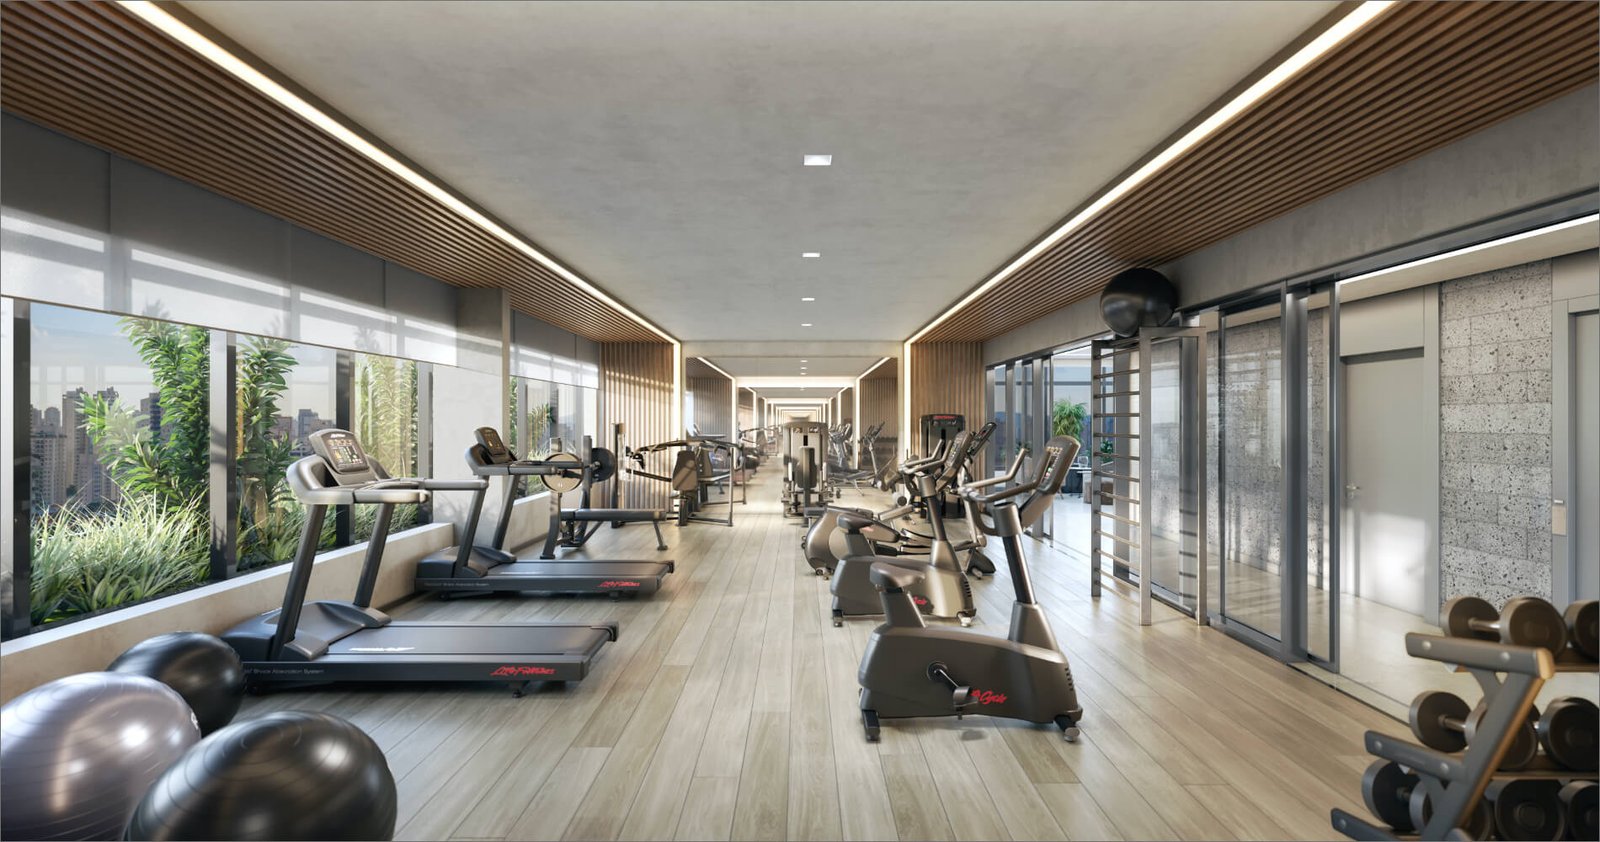 Fitness no rooftop Funchal 641 Apartments - Perspectiva ilustrada